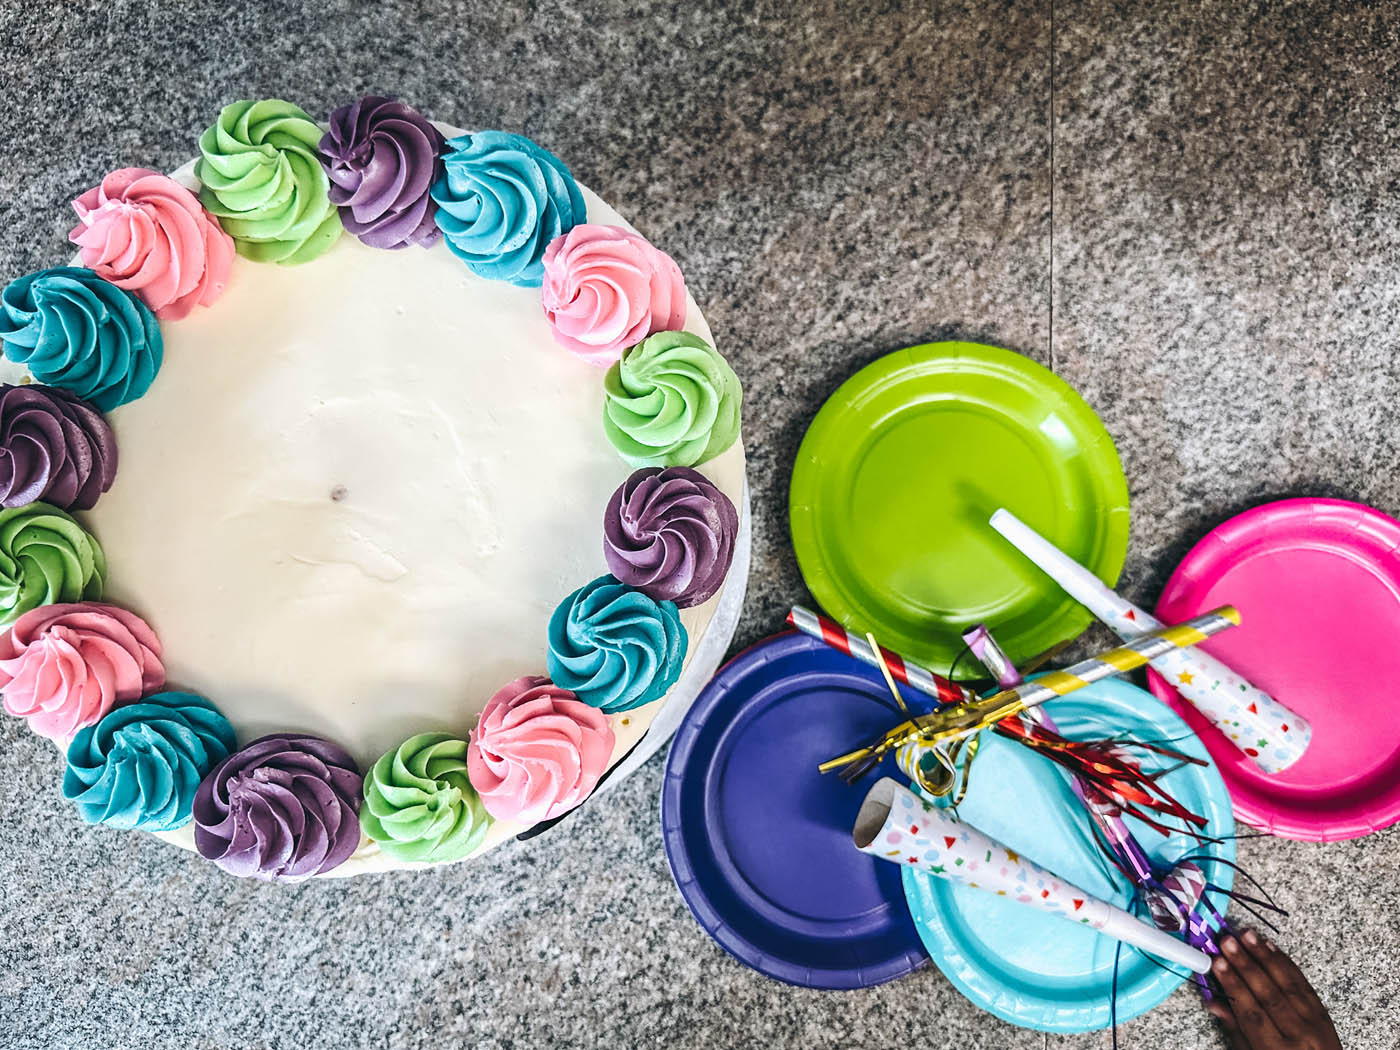 A cake and party supplies - party utensil supplies provided at Romp n' Roll toddler birthday venues.